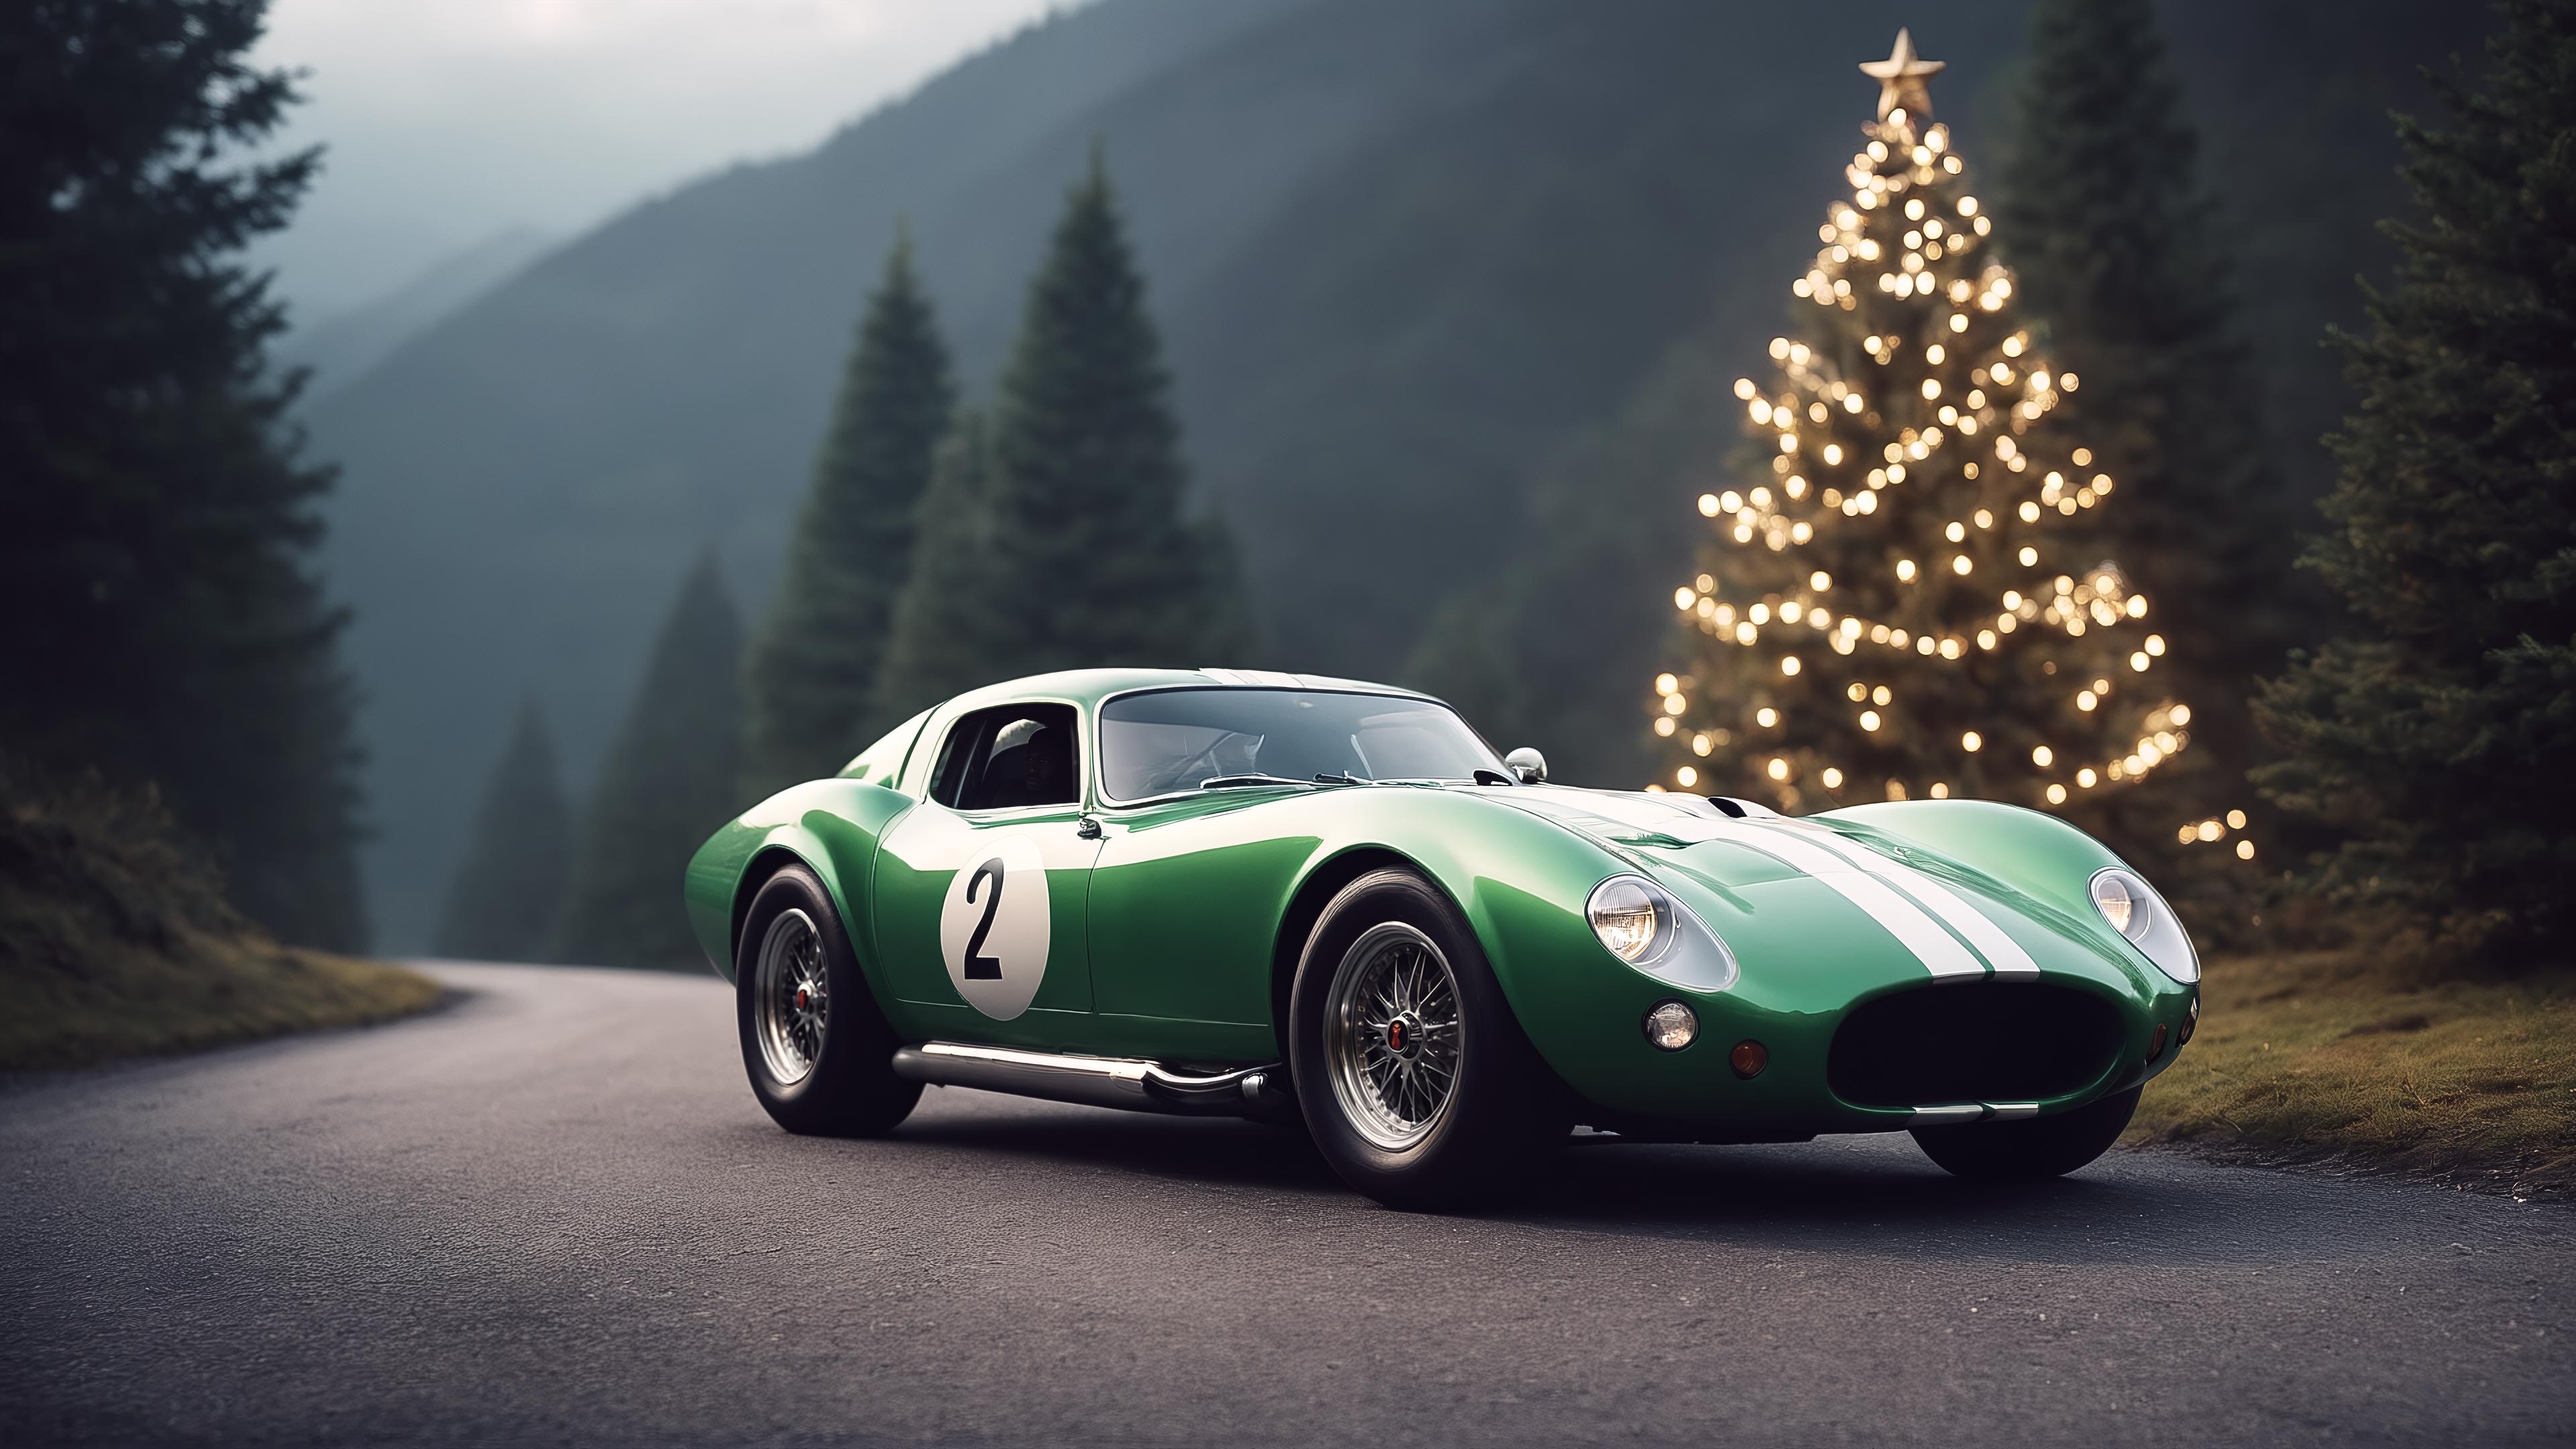 A green sports car with a 2 on the door is parked in front of a lit-up Christmas tree.